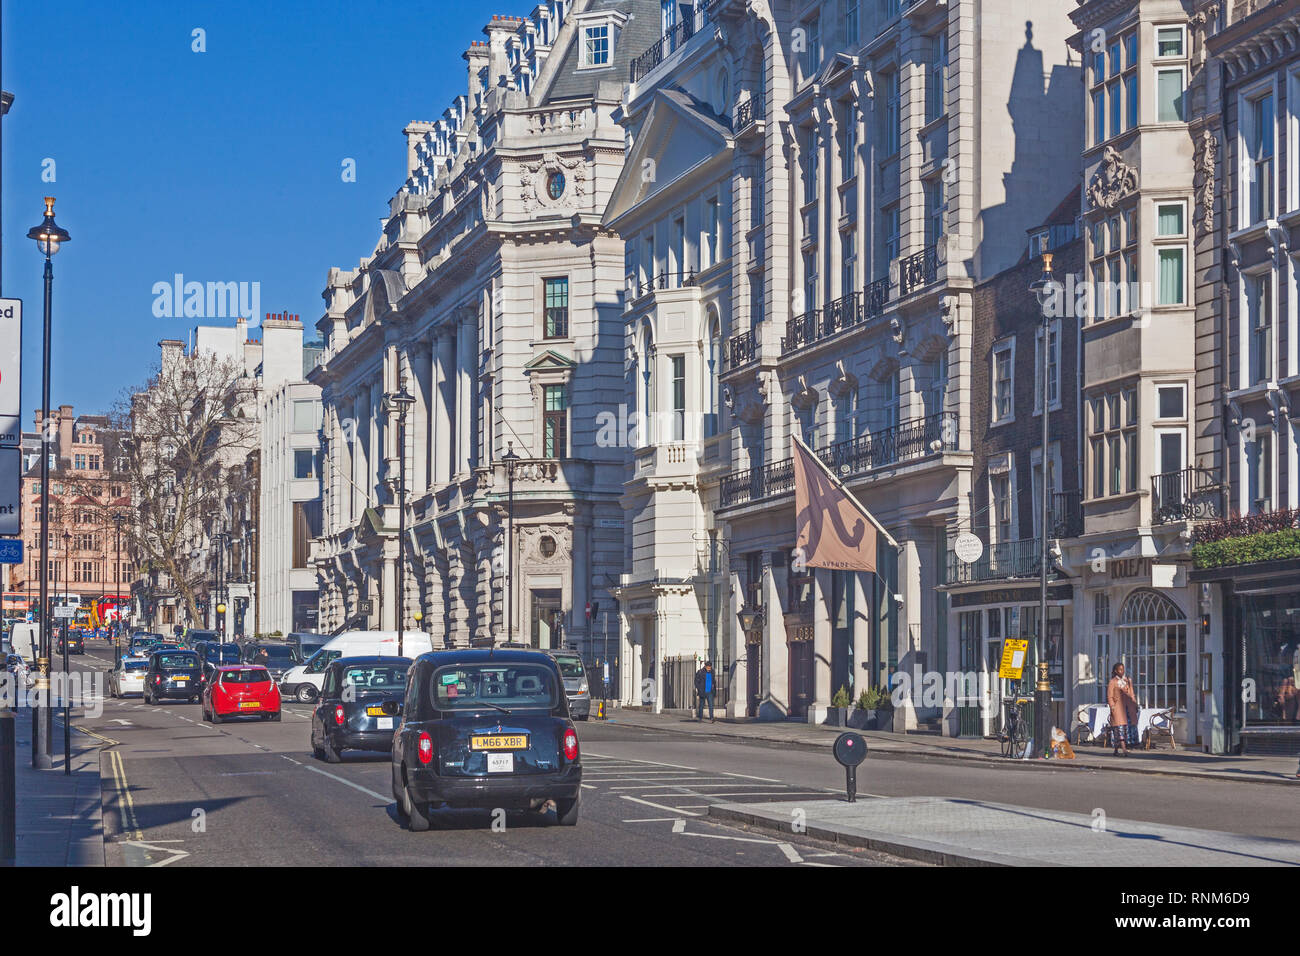 London, St James's. The eastern side of St James's Street, home of exclusive shops and gentlemen's clubs. Stock Photo